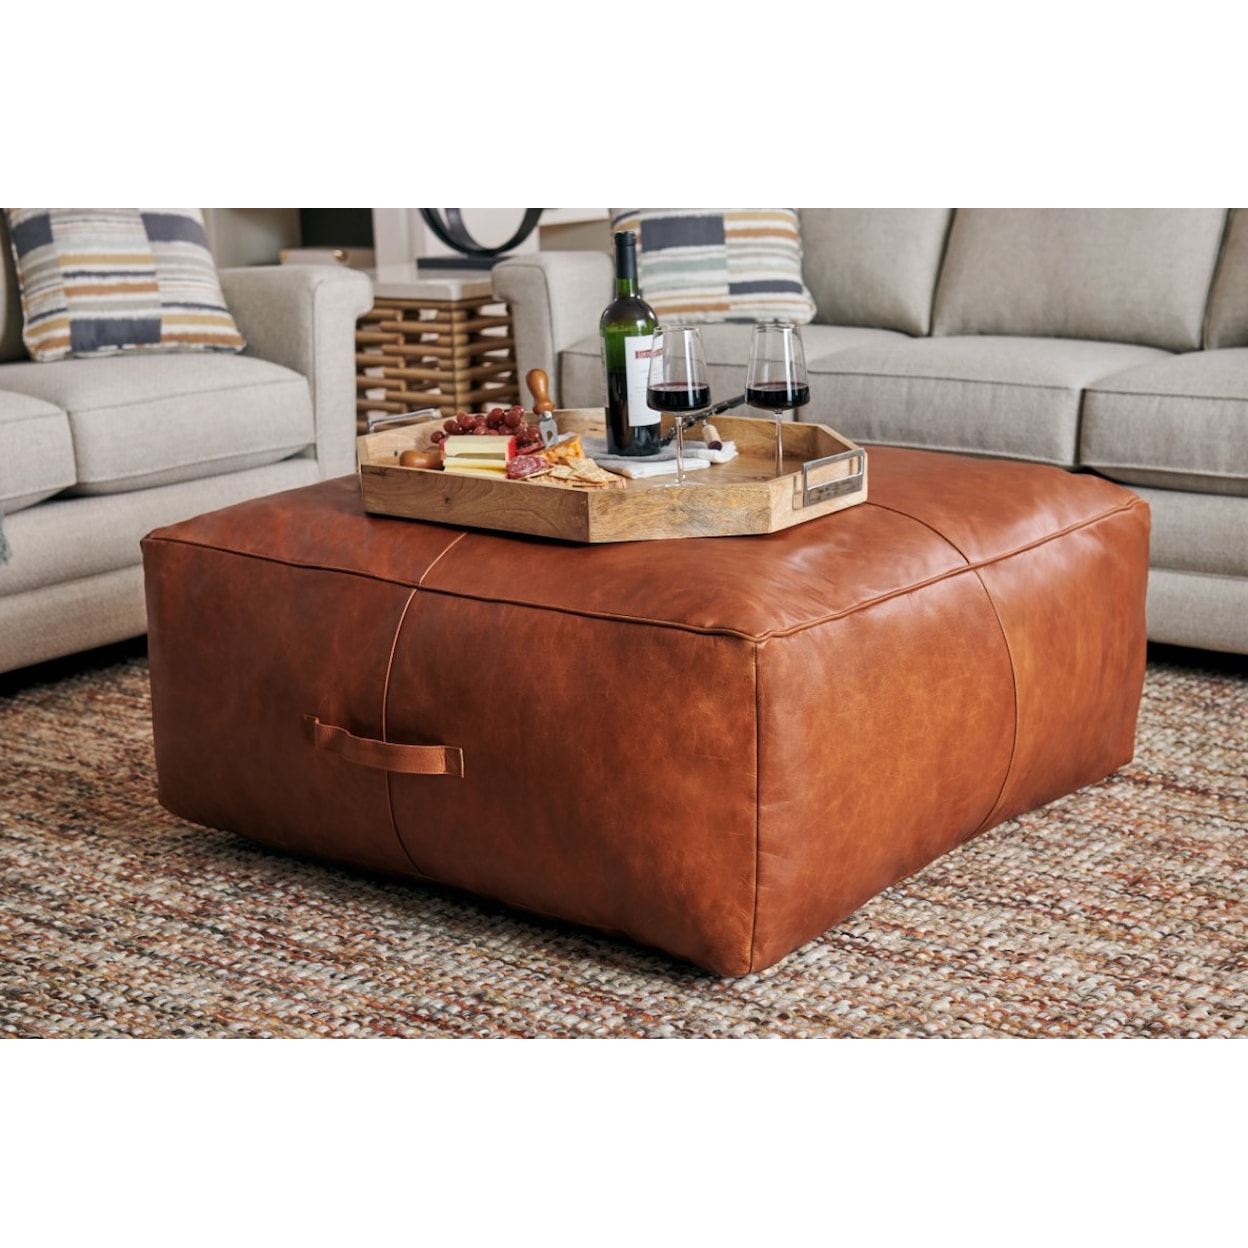 Hammary Trunkclub Large Square Pouf